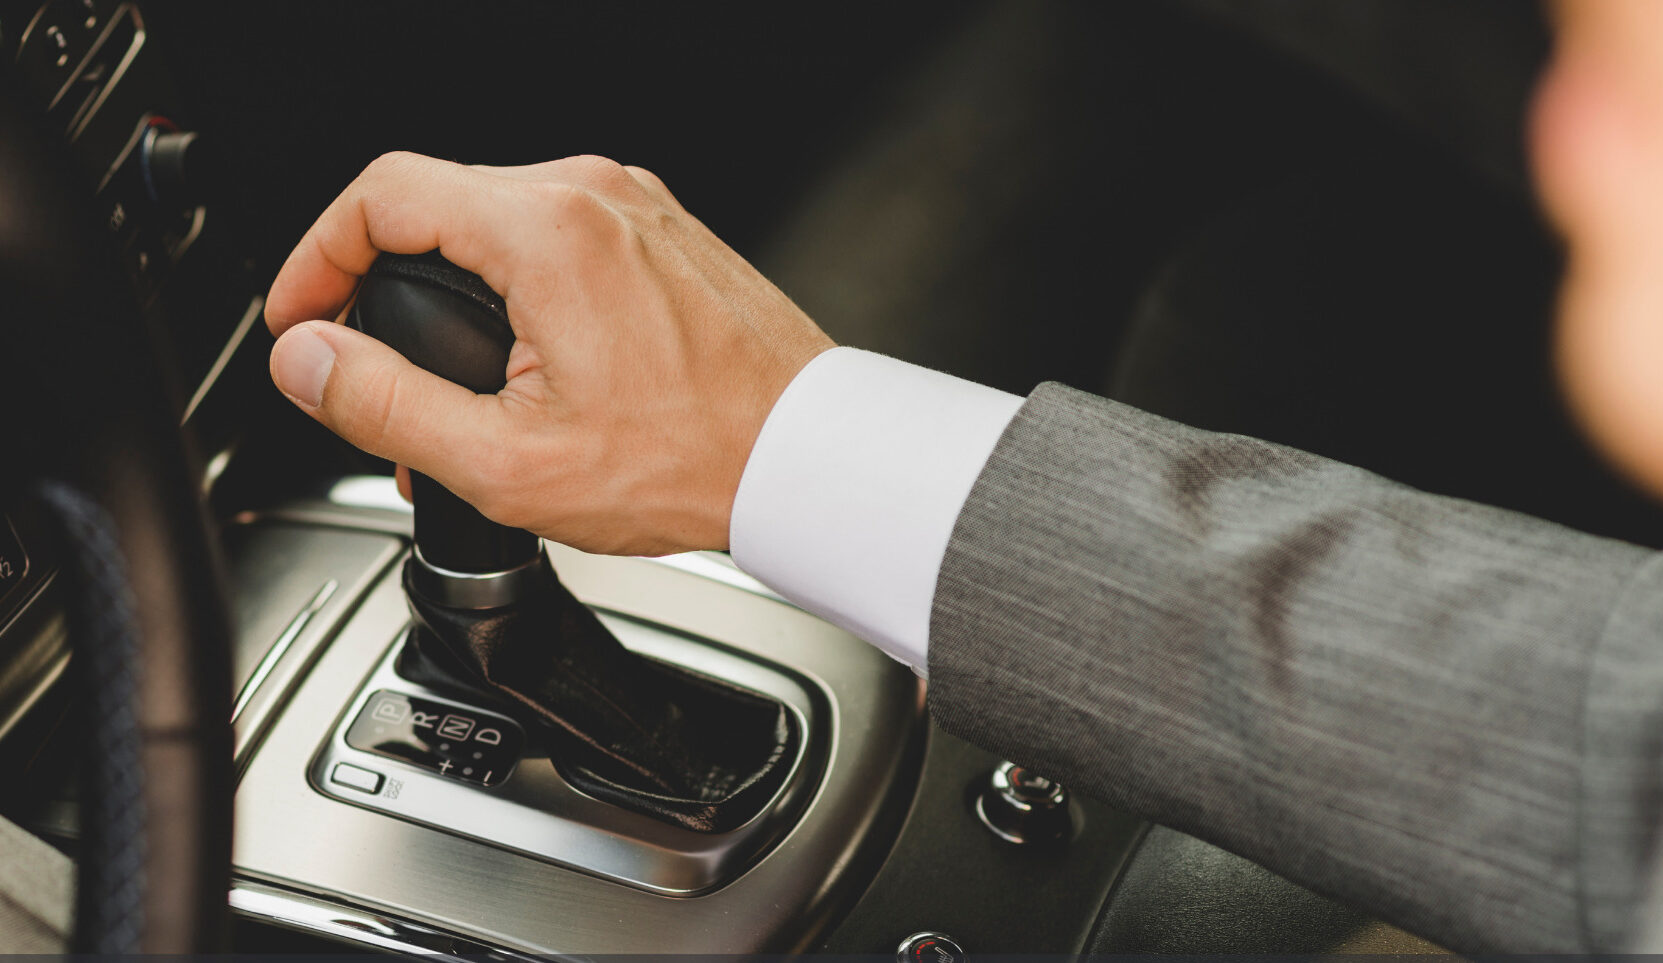 What are the benefits of getting stick shift lessons from a reputed driving school in Glendale